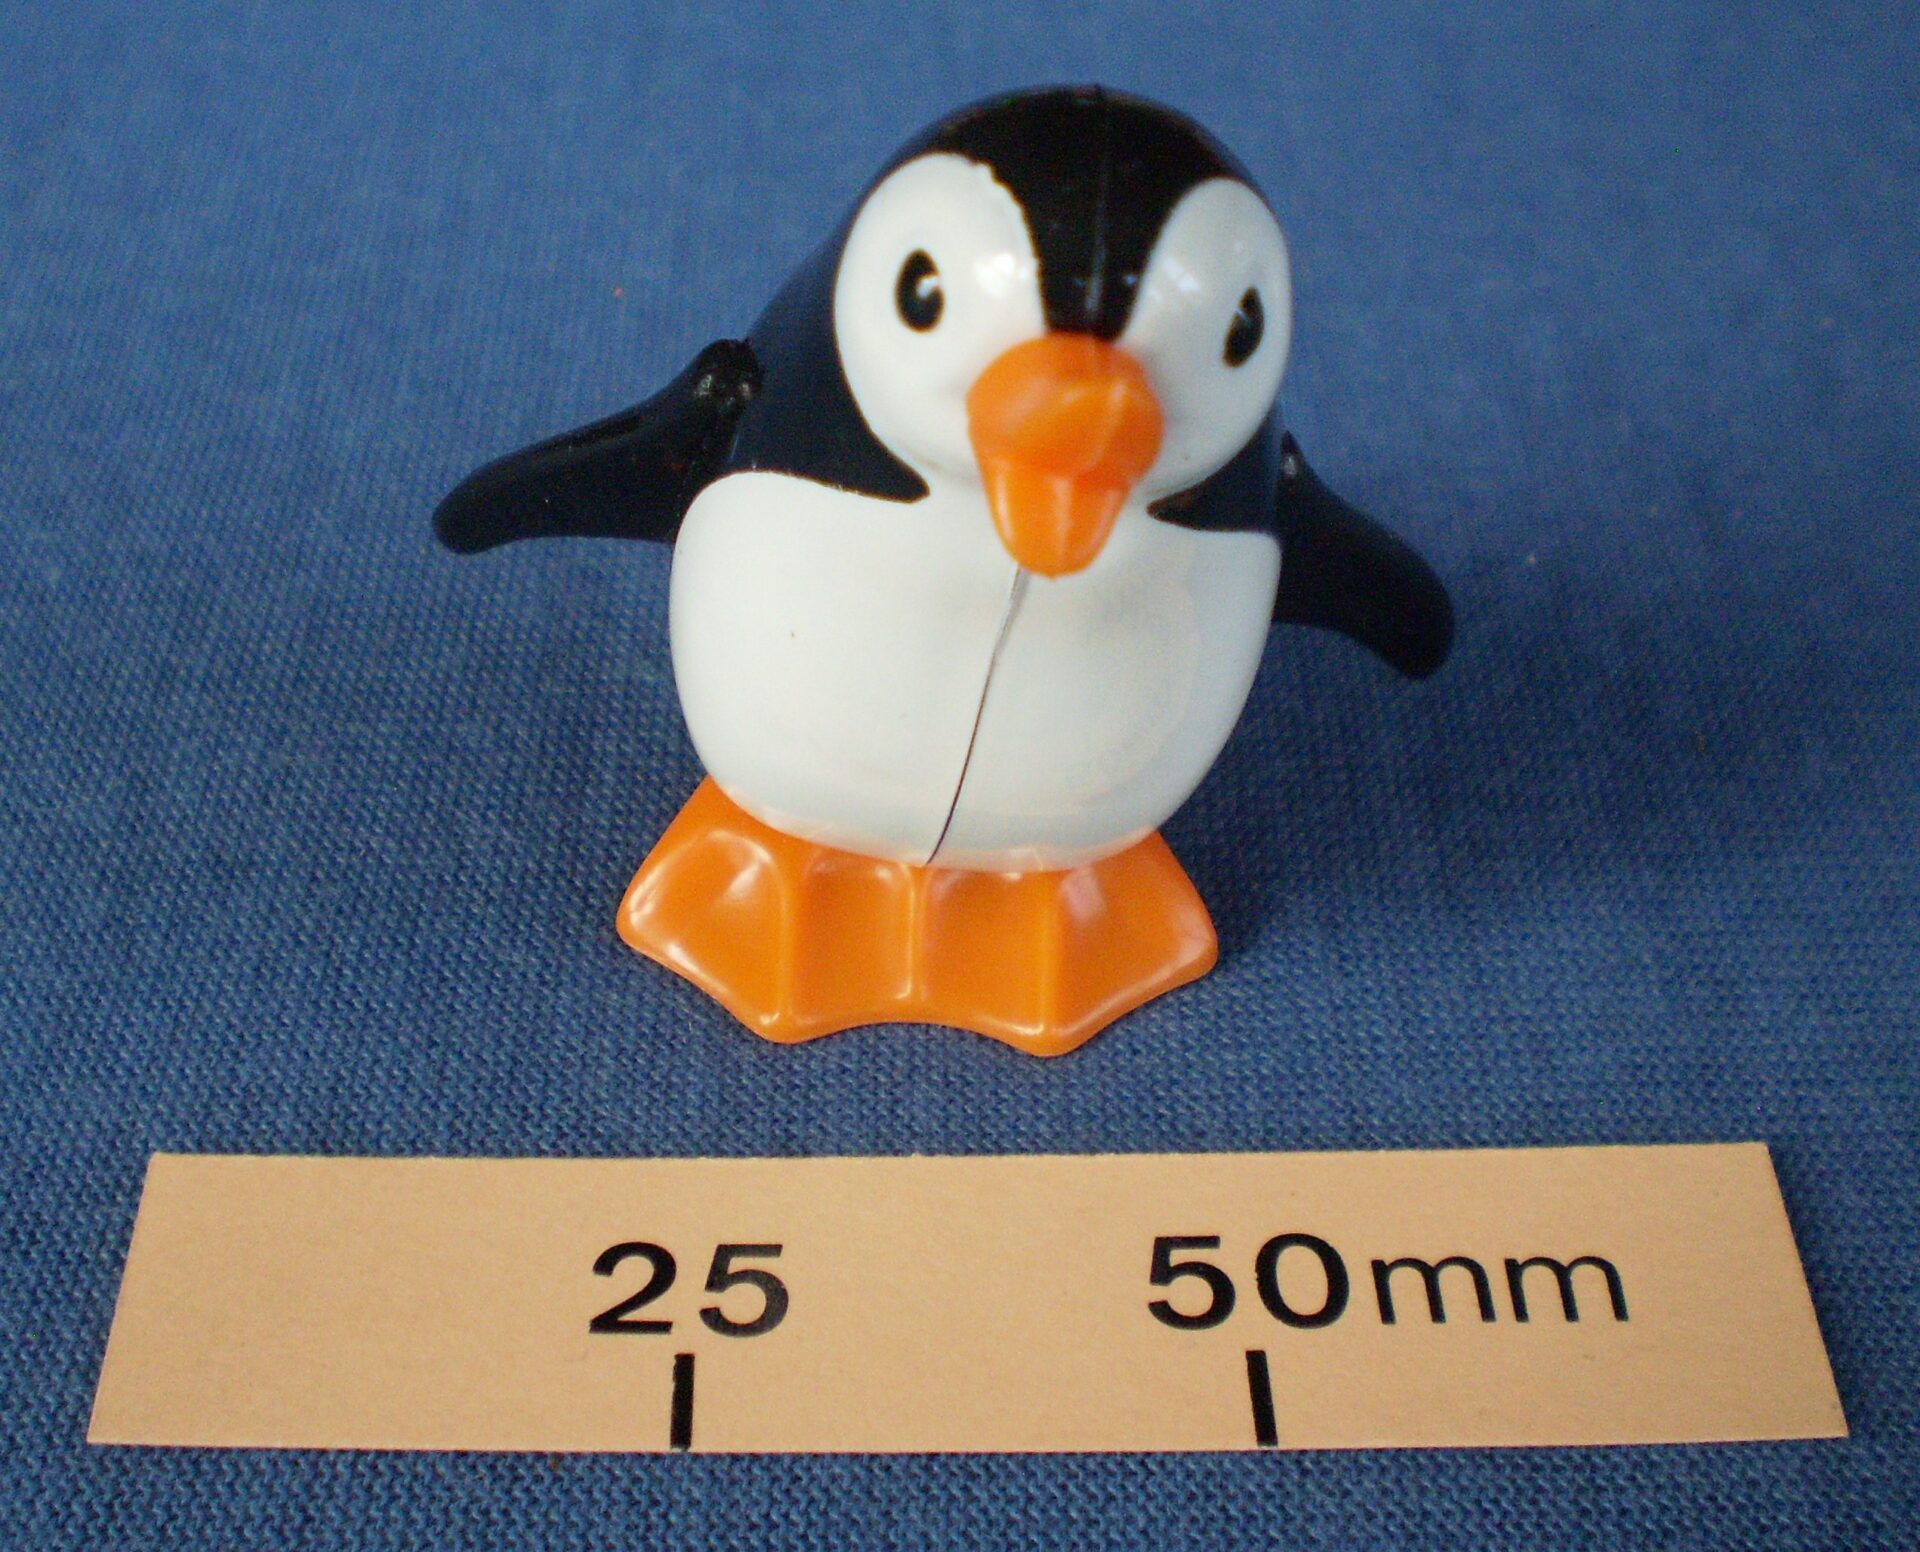 Plastic wind up waddling penguin, made in China